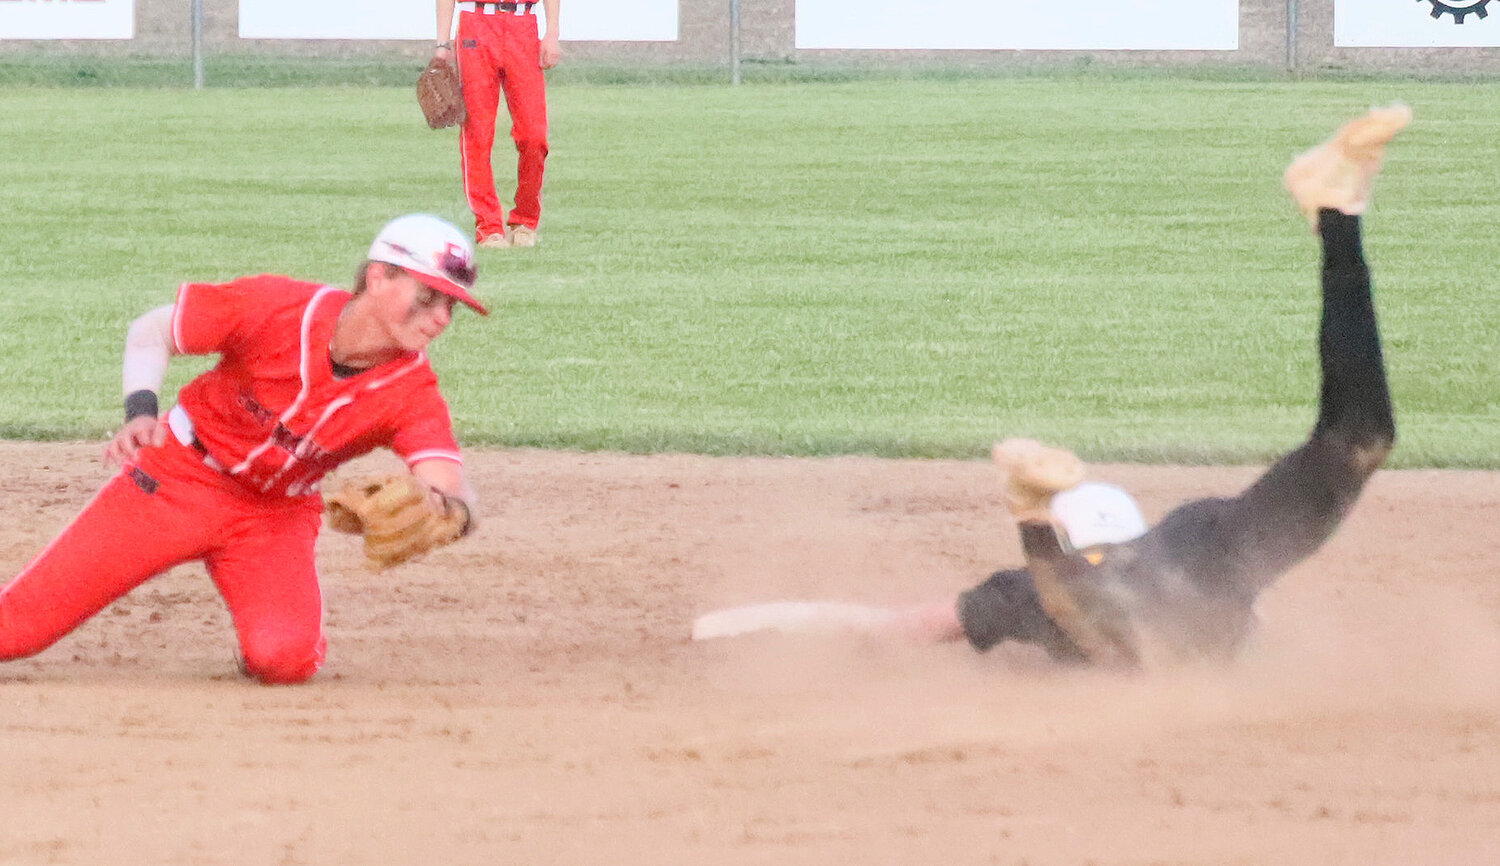 Central Lee's Blake Davis takes a wide slide into second after stealing the base in the top of the 2nd innings of the Fort Madison v. Central Lee baseball game Monday night. The Hounds won 2-1 to start the year 3-0.